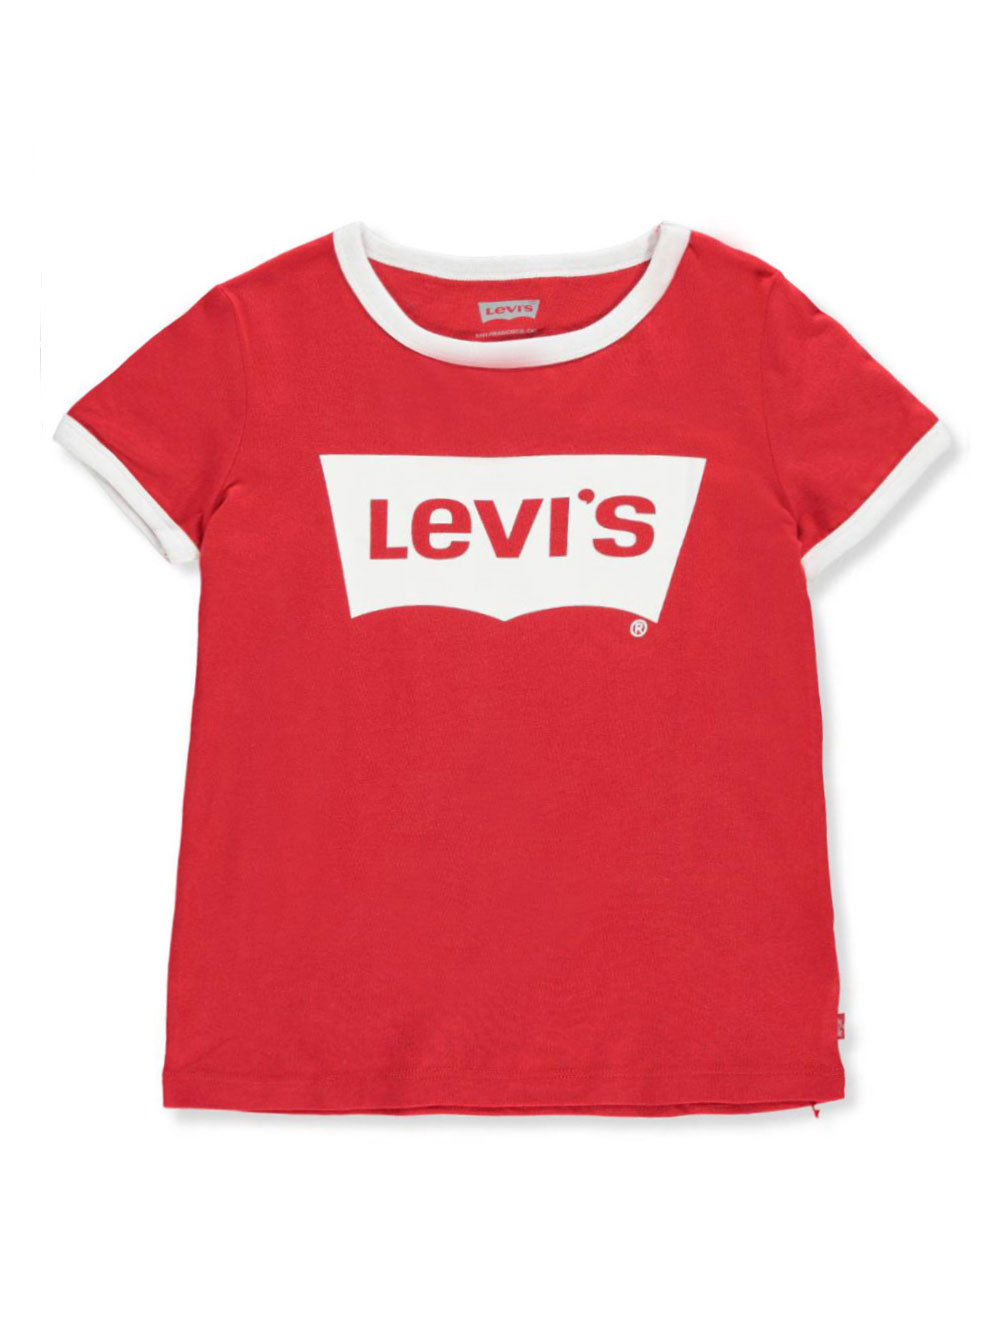 Girls' T-Shirt by Levi's in red and 